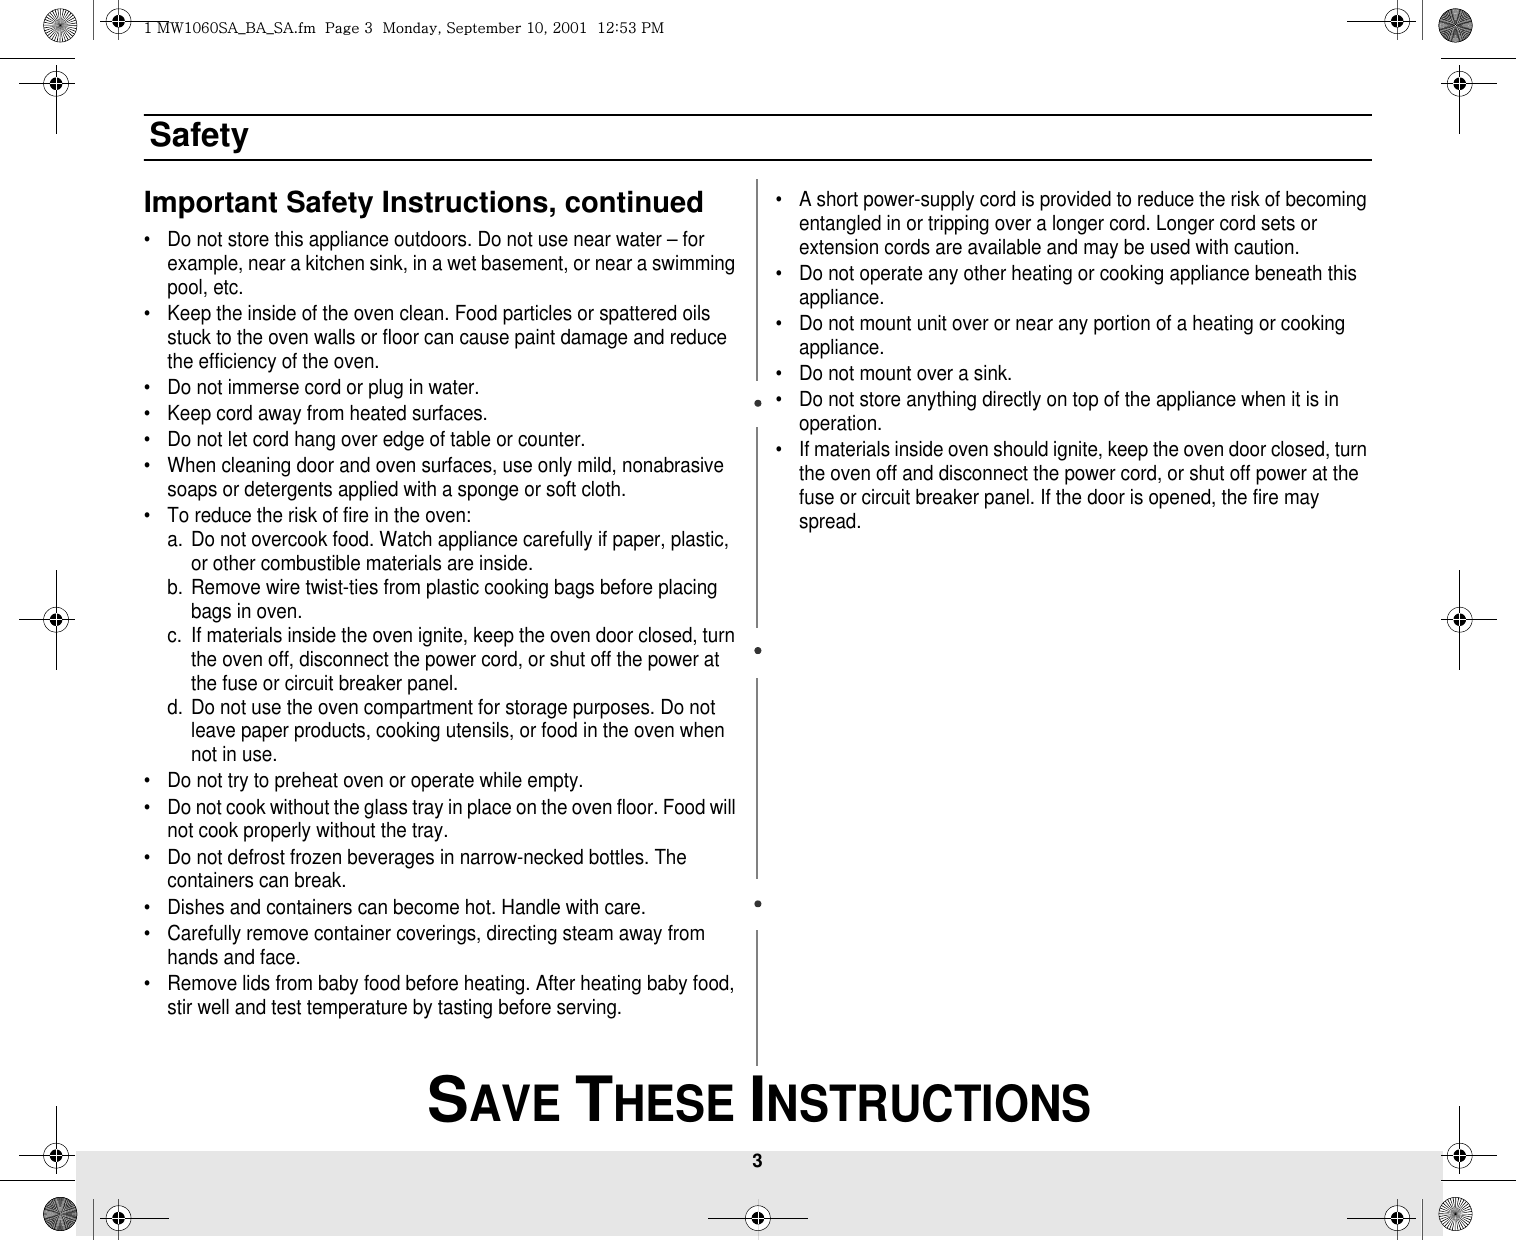 3 SAVE THESE INSTRUCTIONSSafetyImportant Safety Instructions, continued• Do not store this appliance outdoors. Do not use near water – for example, near a kitchen sink, in a wet basement, or near a swimming pool, etc. • Keep the inside of the oven clean. Food particles or spattered oils stuck to the oven walls or floor can cause paint damage and reduce the efficiency of the oven.• Do not immerse cord or plug in water.• Keep cord away from heated surfaces.• Do not let cord hang over edge of table or counter.• When cleaning door and oven surfaces, use only mild, nonabrasive soaps or detergents applied with a sponge or soft cloth.• To reduce the risk of fire in the oven:a. Do not overcook food. Watch appliance carefully if paper, plastic, or other combustible materials are inside.b. Remove wire twist-ties from plastic cooking bags before placing bags in oven.c. If materials inside the oven ignite, keep the oven door closed, turn the oven off, disconnect the power cord, or shut off the power at the fuse or circuit breaker panel.d. Do not use the oven compartment for storage purposes. Do not leave paper products, cooking utensils, or food in the oven when not in use.• Do not try to preheat oven or operate while empty.• Do not cook without the glass tray in place on the oven floor. Food will not cook properly without the tray.• Do not defrost frozen beverages in narrow-necked bottles. The containers can break.• Dishes and containers can become hot. Handle with care.• Carefully remove container coverings, directing steam away from hands and face.• Remove lids from baby food before heating. After heating baby food, stir well and test temperature by tasting before serving.• A short power-supply cord is provided to reduce the risk of becoming entangled in or tripping over a longer cord. Longer cord sets or extension cords are available and may be used with caution. • Do not operate any other heating or cooking appliance beneath this appliance.• Do not mount unit over or near any portion of a heating or cooking appliance.• Do not mount over a sink.• Do not store anything directly on top of the appliance when it is in operation.• If materials inside oven should ignite, keep the oven door closed, turn the oven off and disconnect the power cord, or shut off power at the fuse or circuit breaker panel. If the door is opened, the fire may spread.XGt~XW]WzhihzhUGGwGZGGtSGzGXWSGYWWXGGXYa\ZGwt